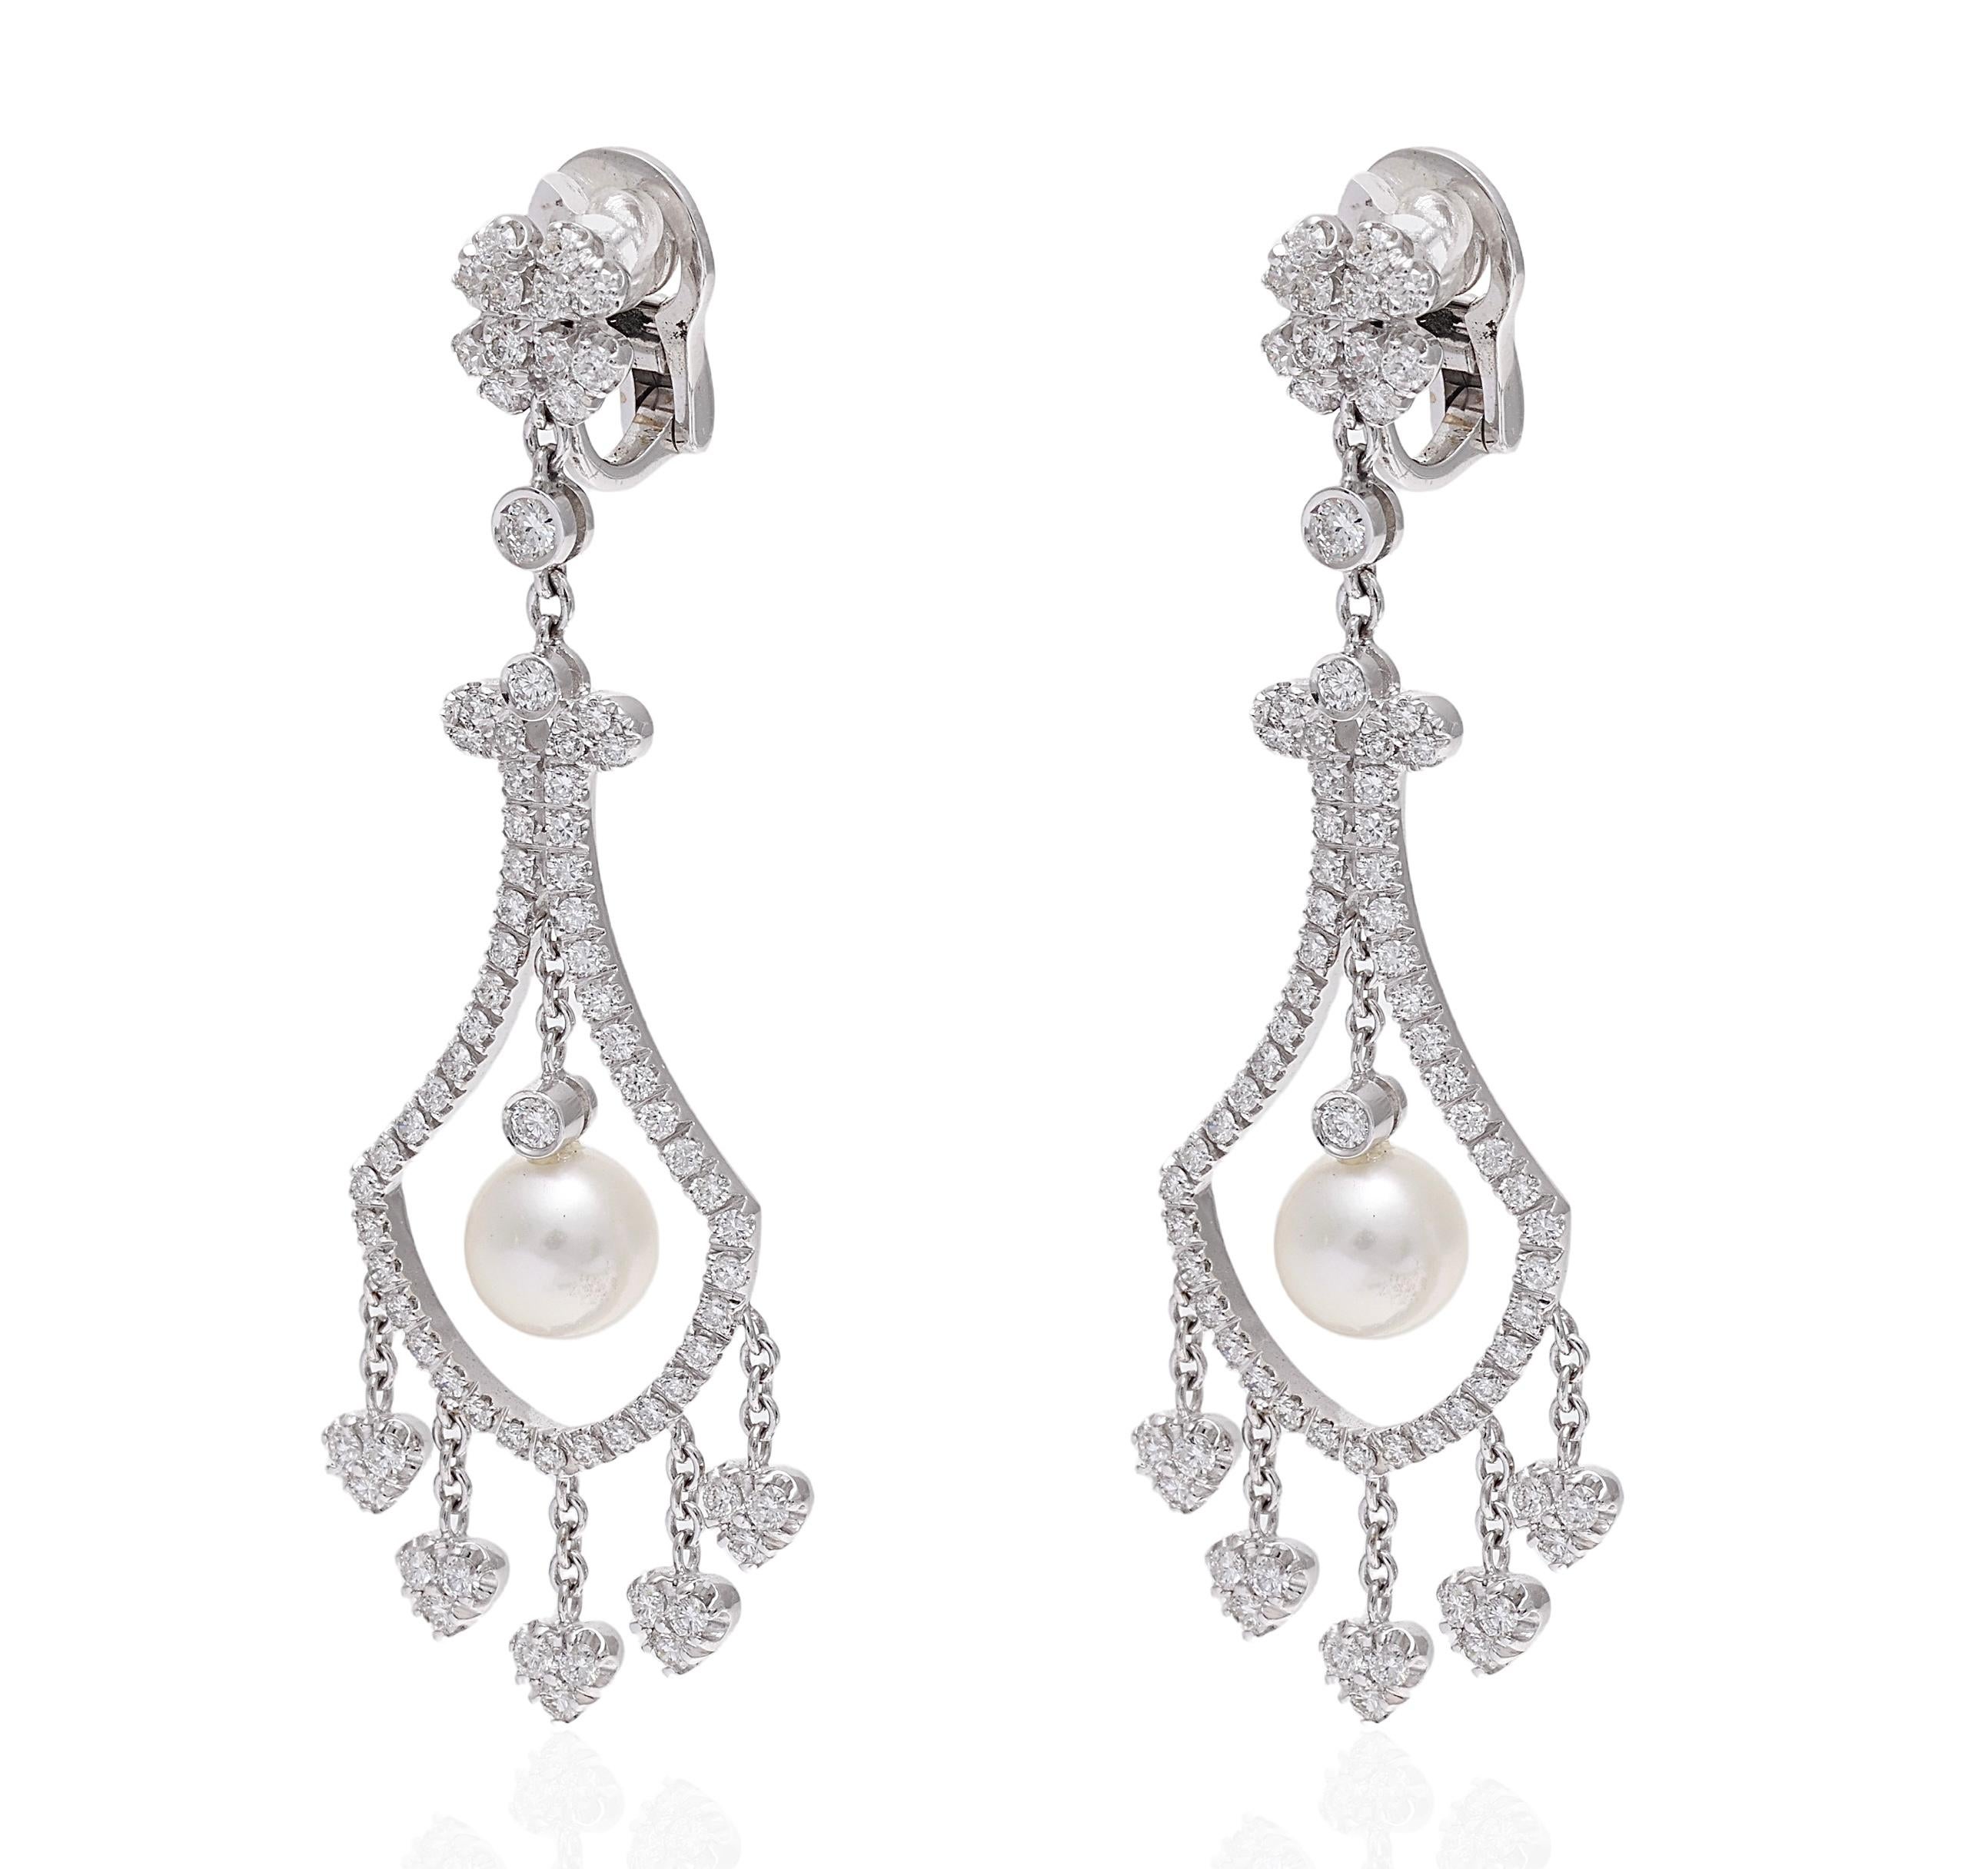 Magnificant 18 kt. white Gold Chandelier / Dangle Earrings With Pearls and 2.47 ct. Diamonds 

Diamonds: Brilliant cut diamonds 2.47 ct.

Pearls: 2 pearls with a diameter of 7.5 mm

Material: 18 kt. white gold

Measurements:  59.5 mm x 17.5 mm x